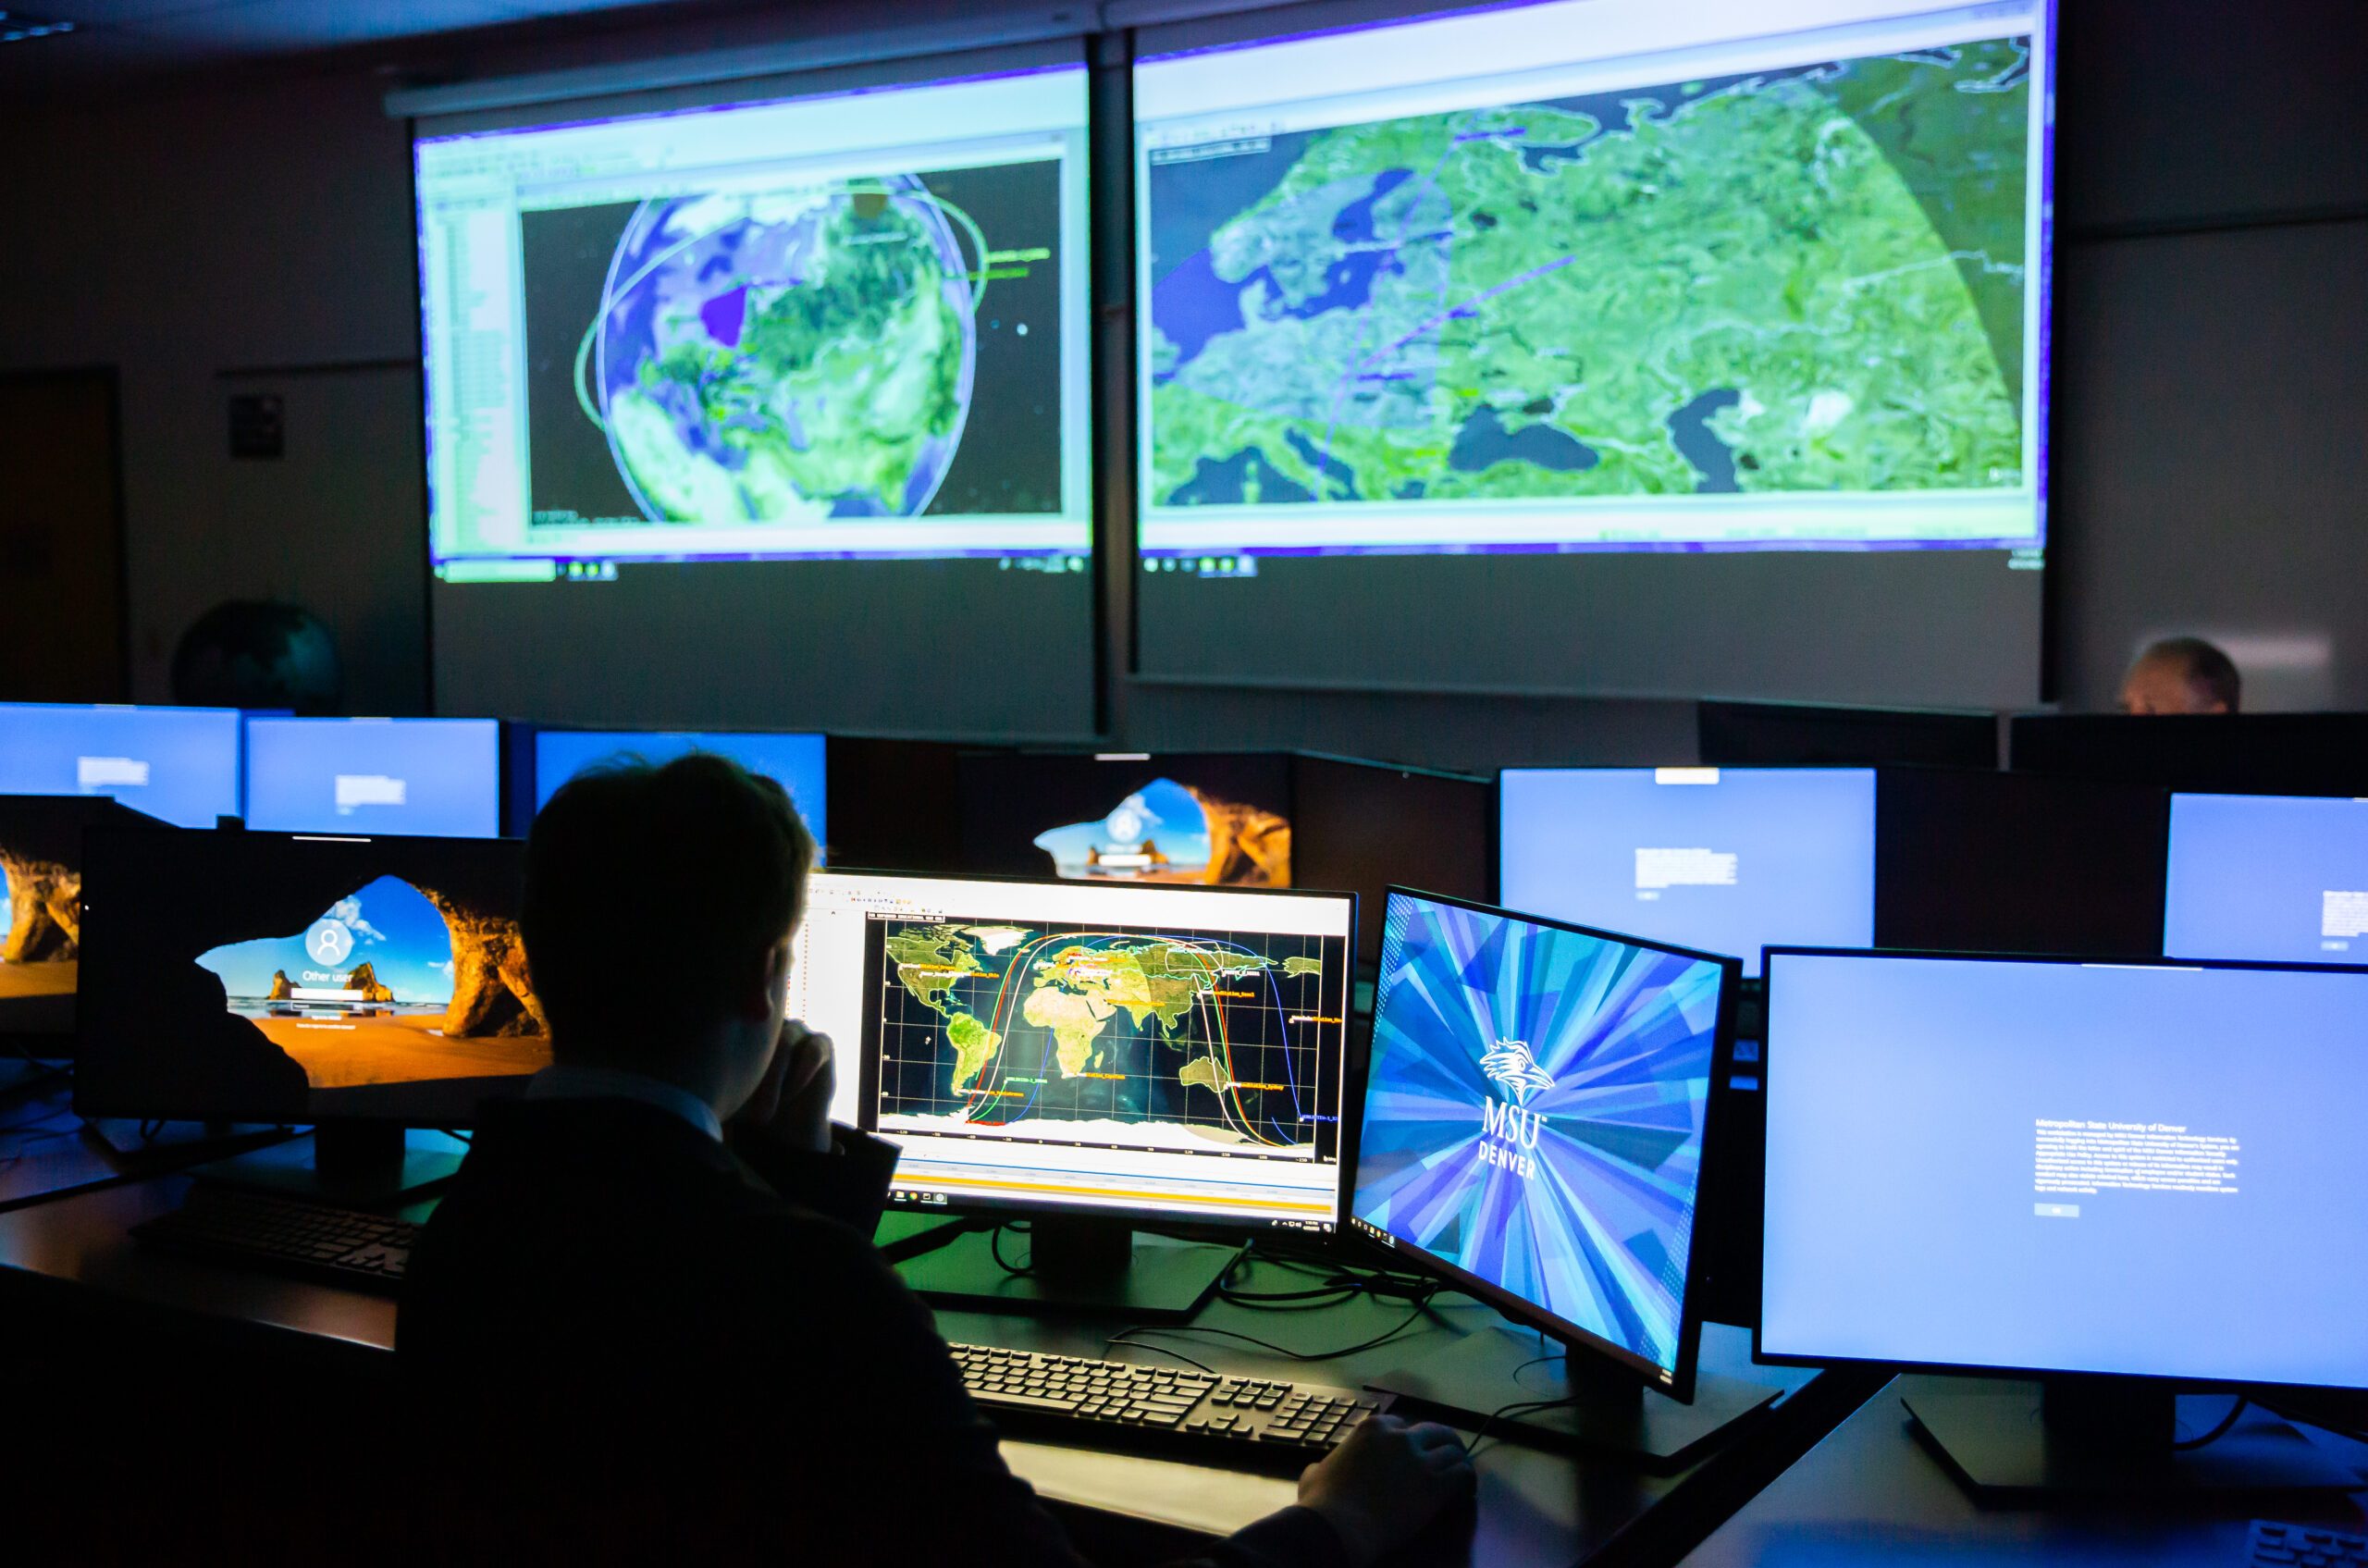 Adrian White, a graduating aviation and aerospace student in the Orbital Mechanics and Aerospace System simulation class, has built out real-life scenarios using open-source satellite data from MAXAR that shows images of the conflict in Ukraine.